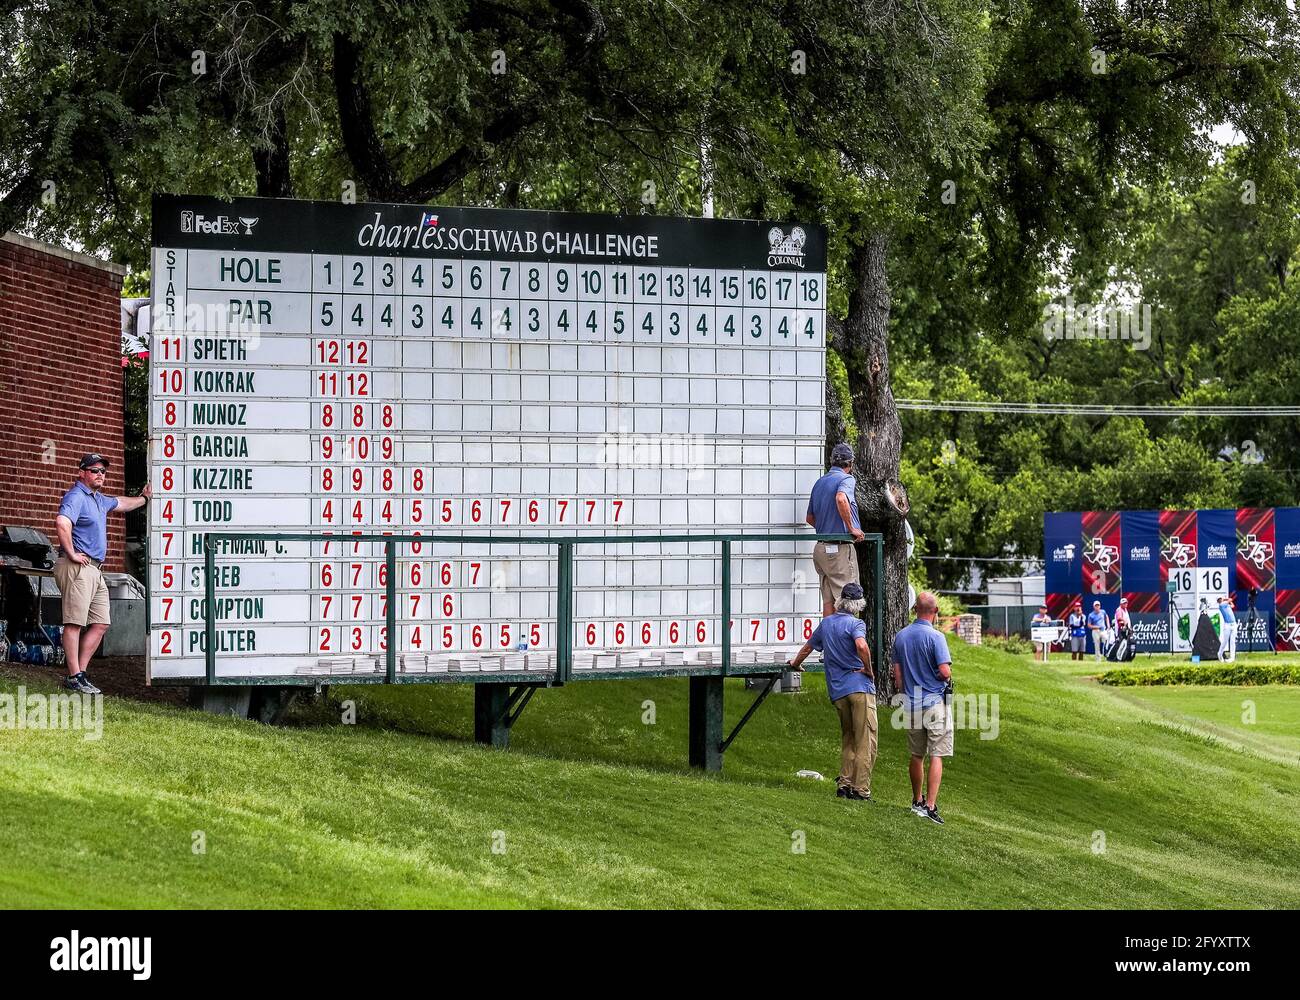 Fort Worth, TX, USA. 29th May, 2021. The leaderboard on the 16th hole  during the third round of the Charles Schwab Challenge golf tournament at Colonial  Country Club in Fort Worth, TX.